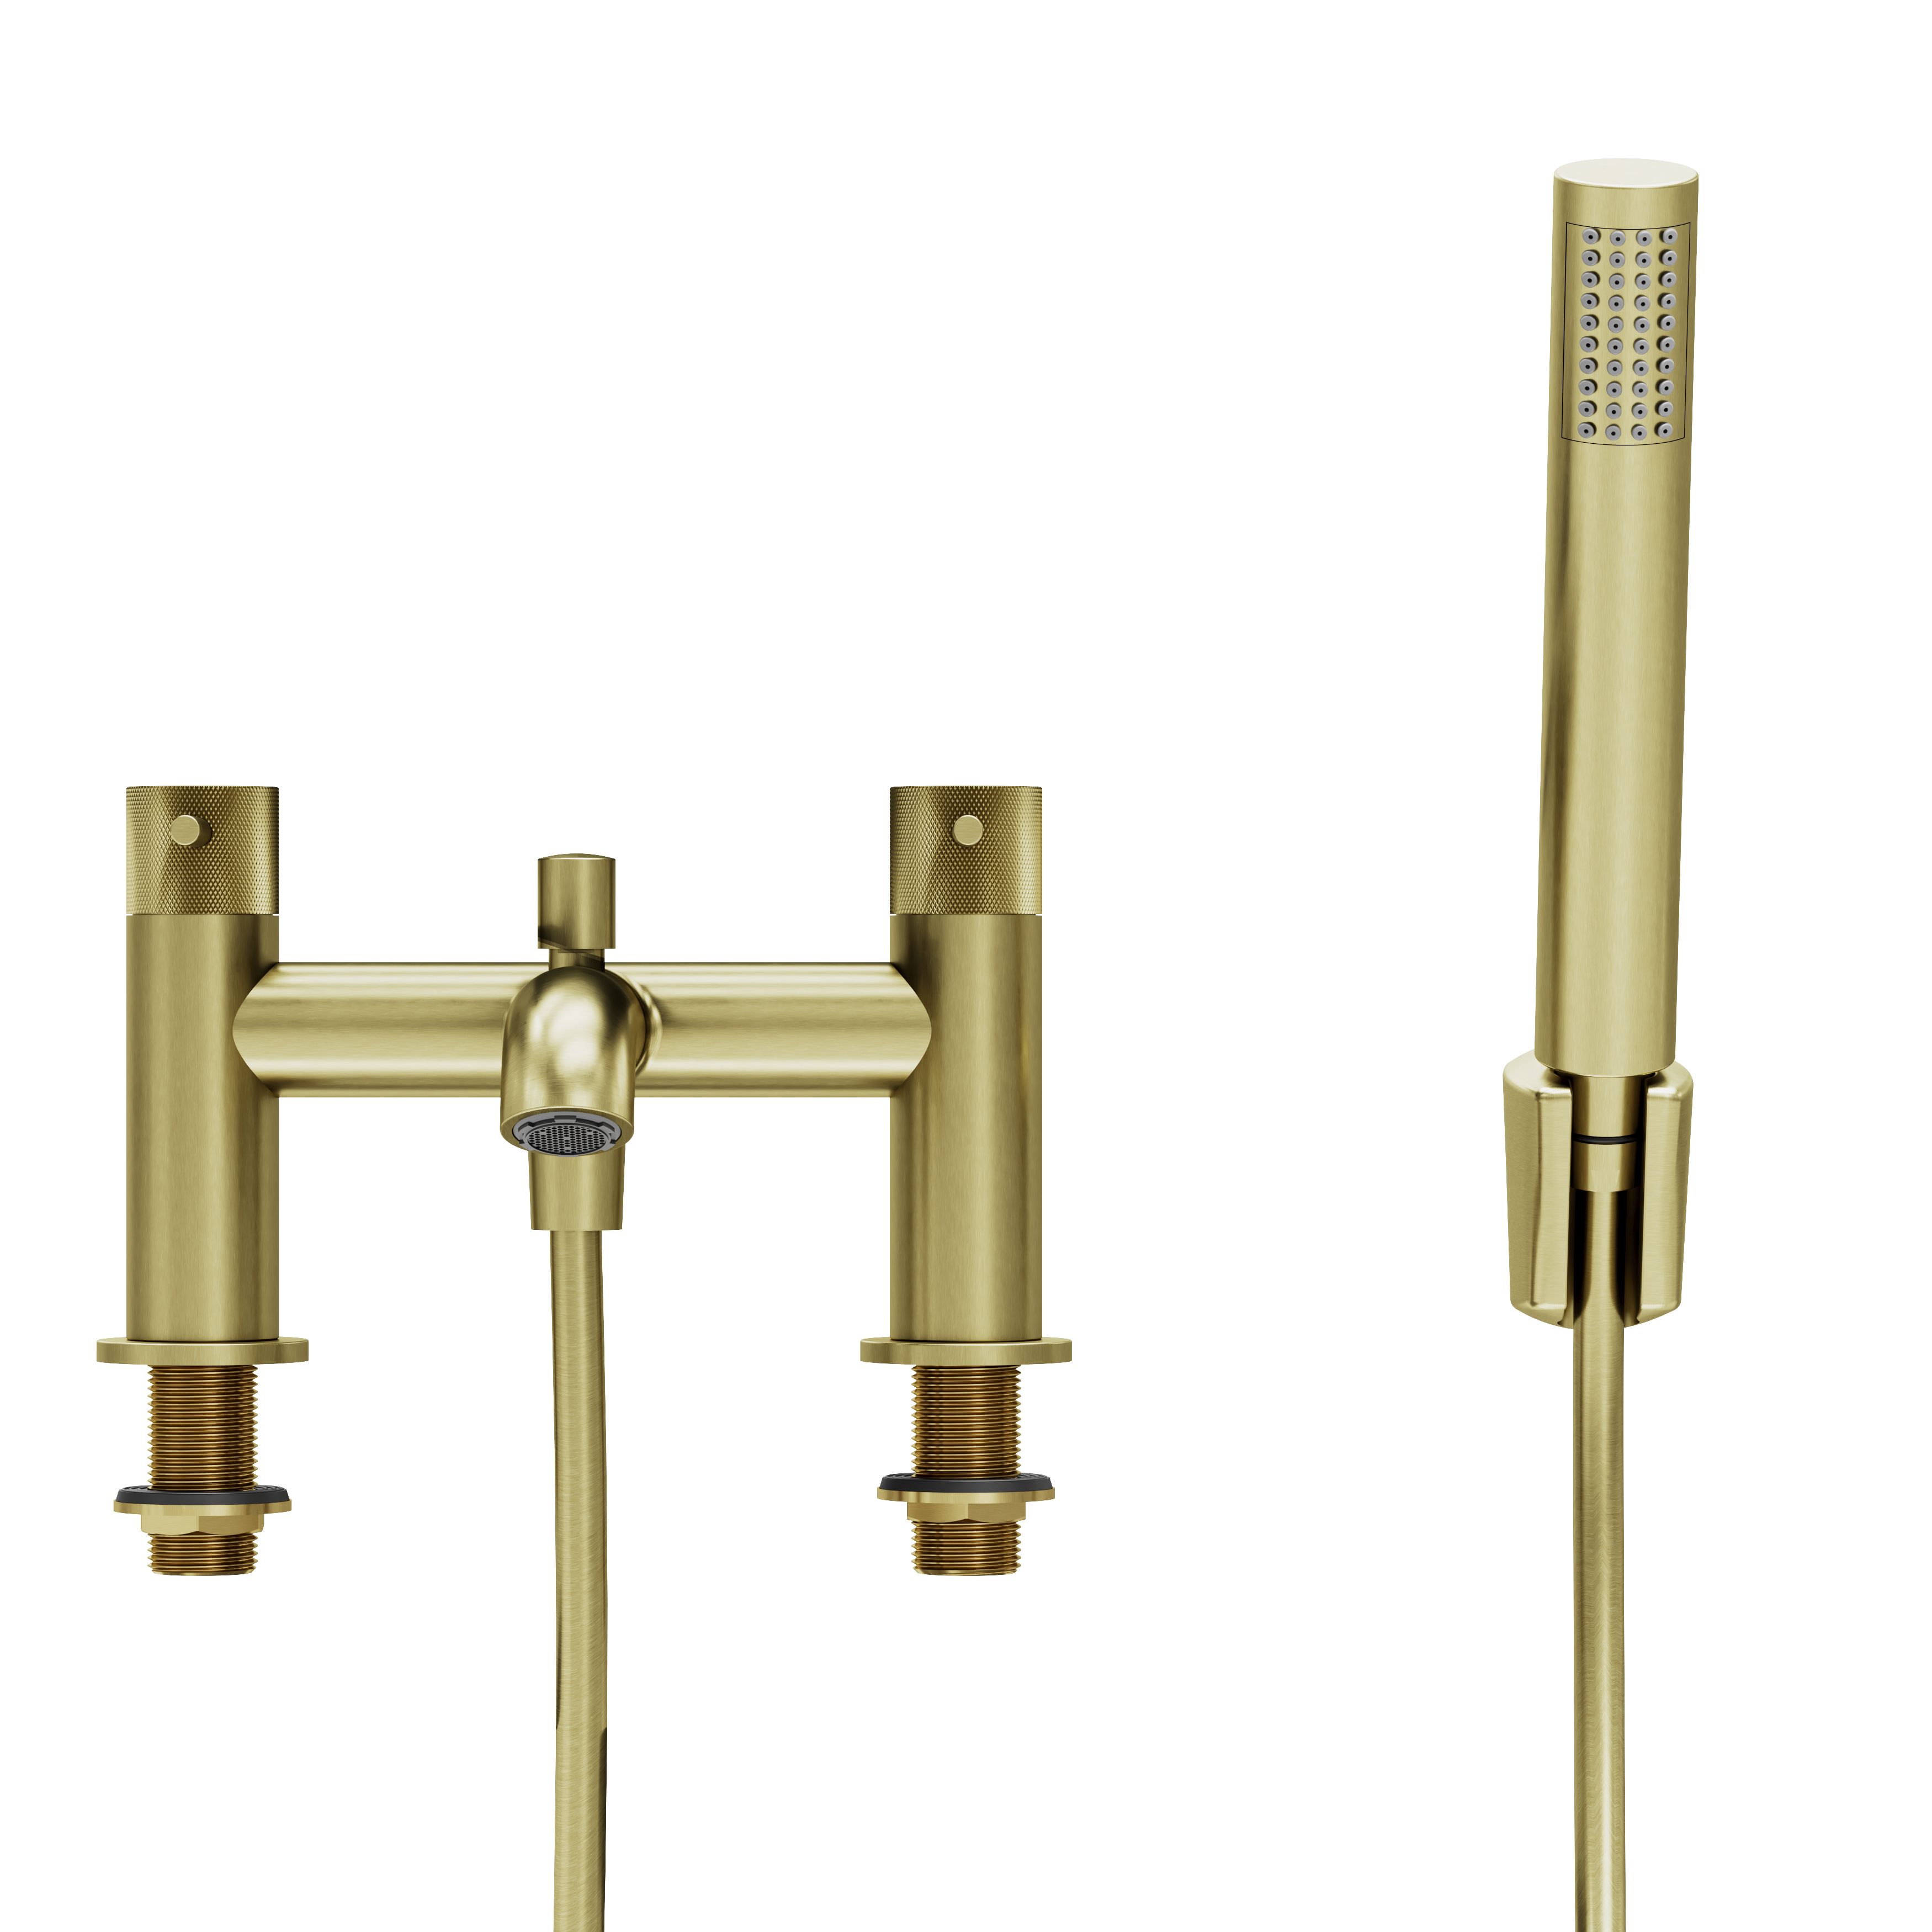 GoodHome Owens Satin Brass effect Deck-mounted Double Bath shower mixer tap with shower kit